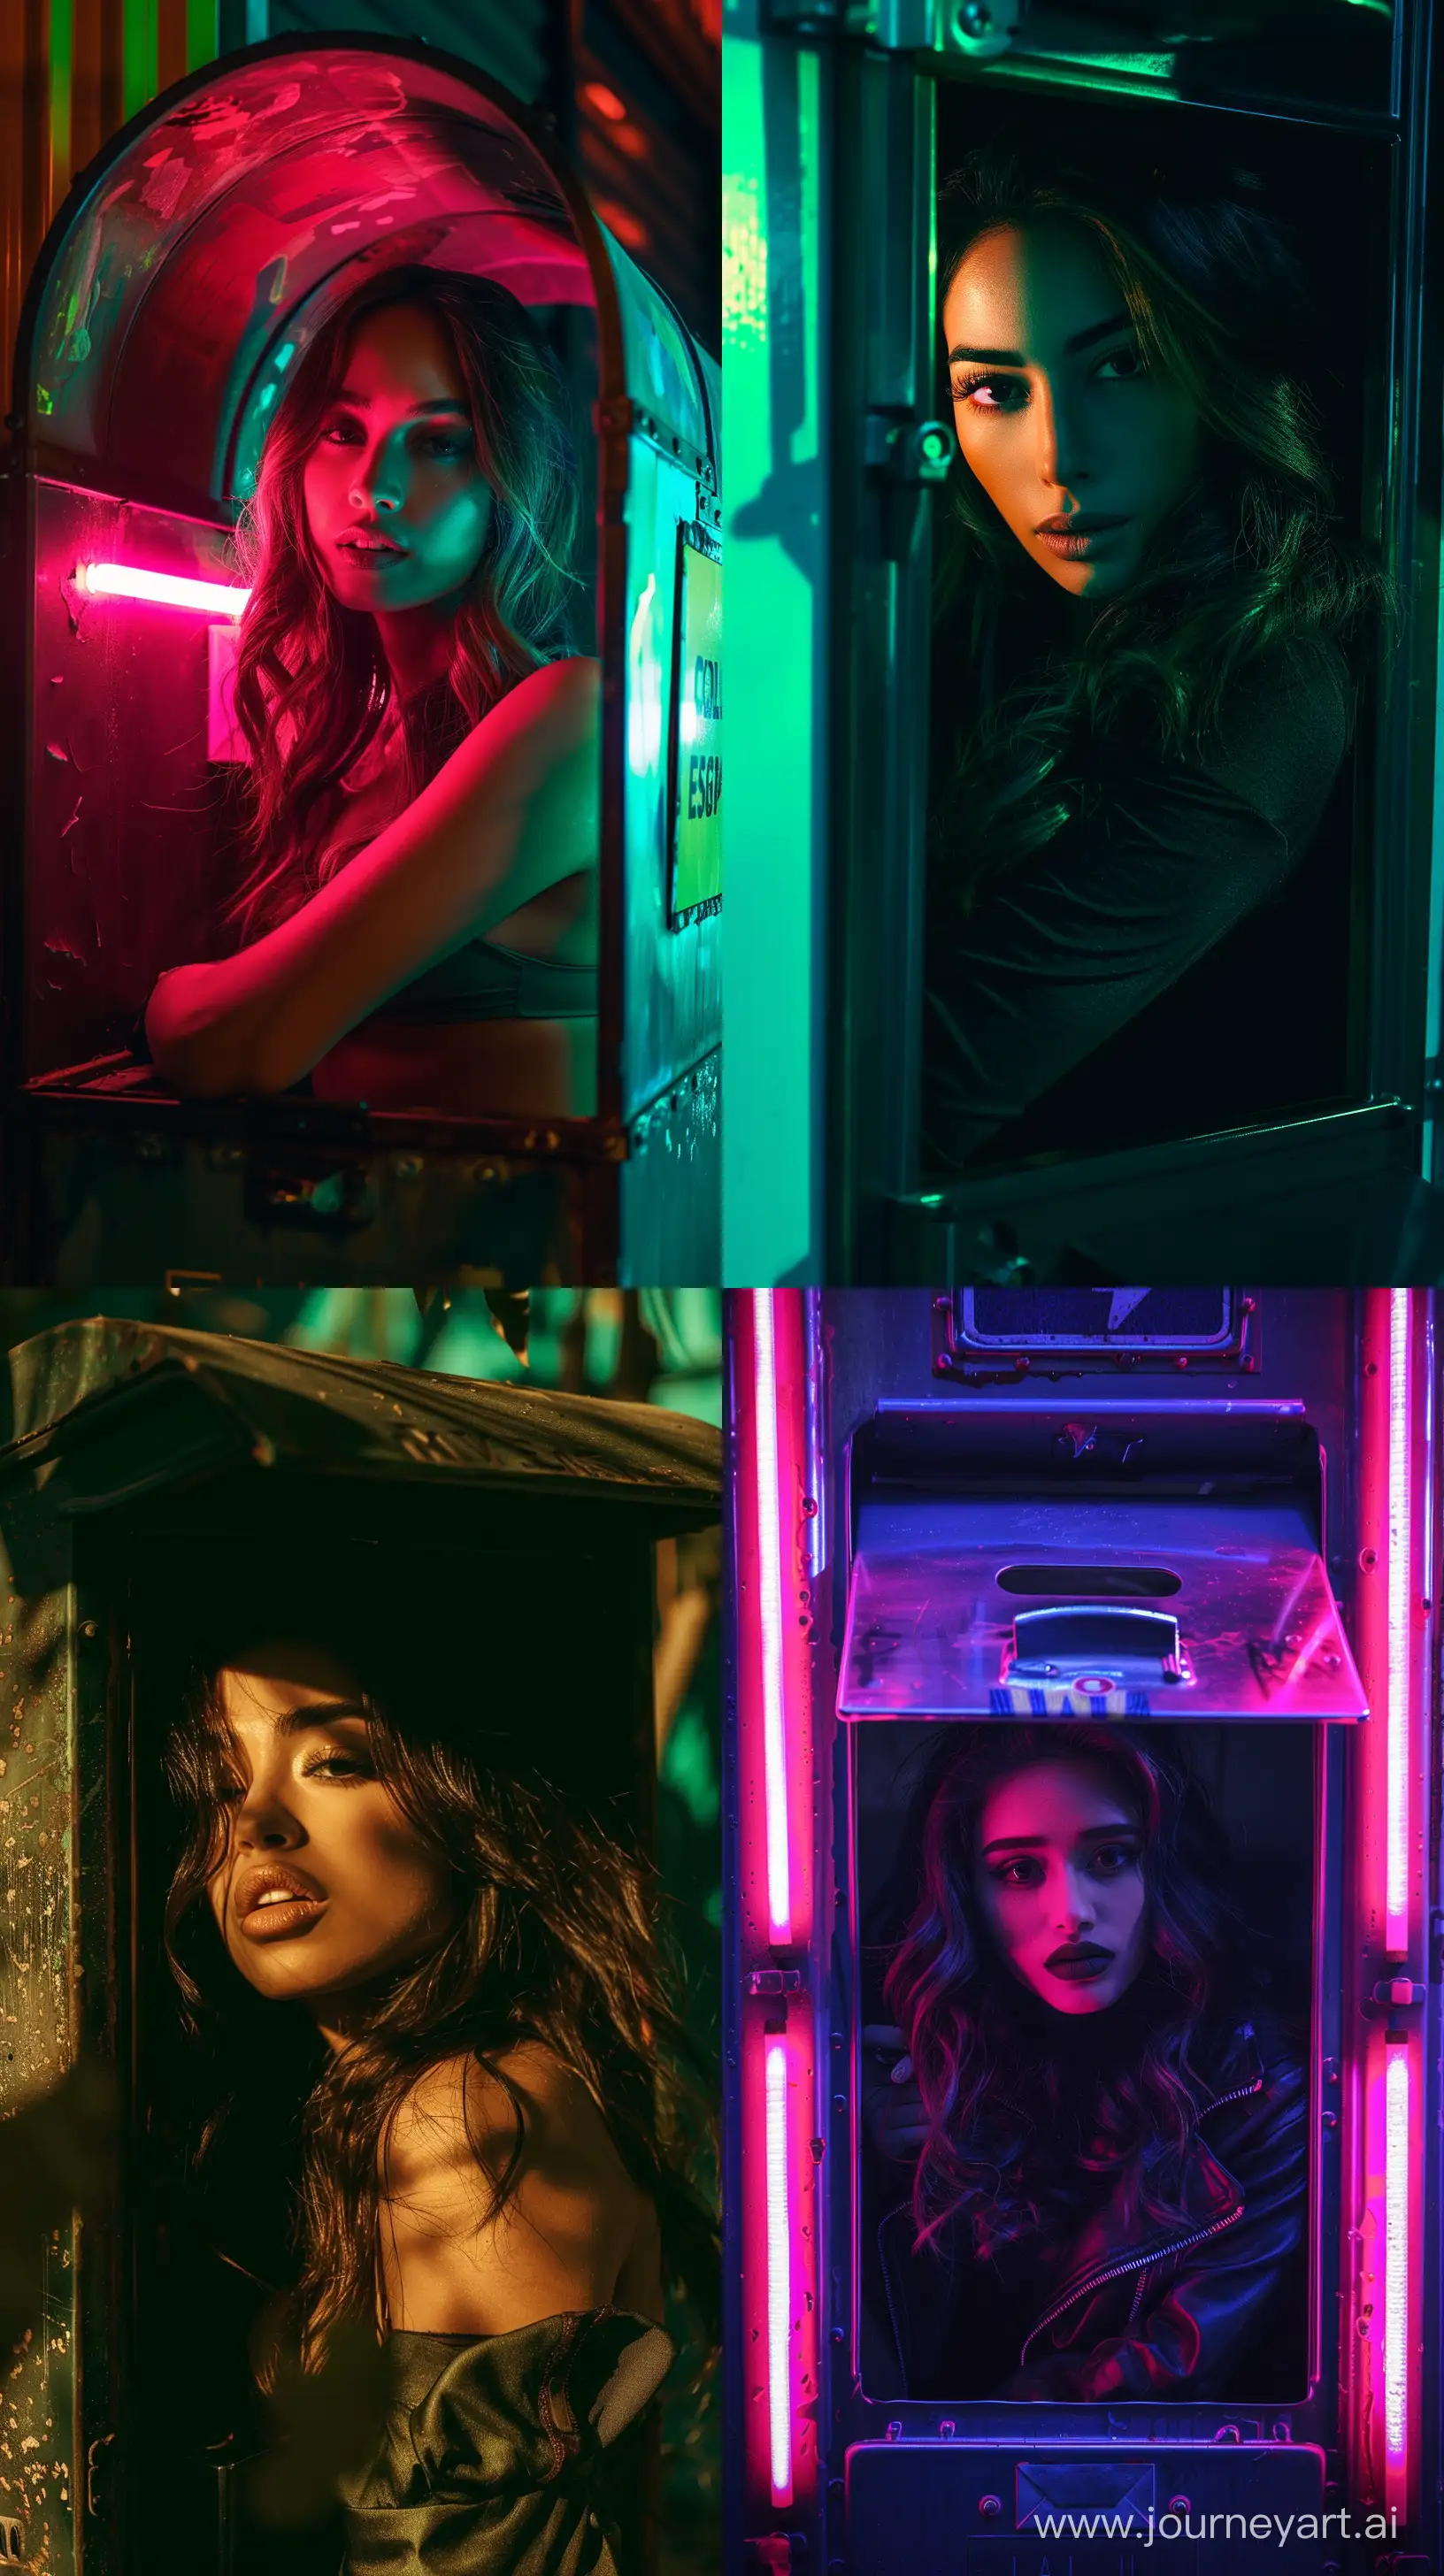 Lali-Esposito-Portrayed-as-a-Mailbox-with-Vivid-Lighting-and-High-Contrast